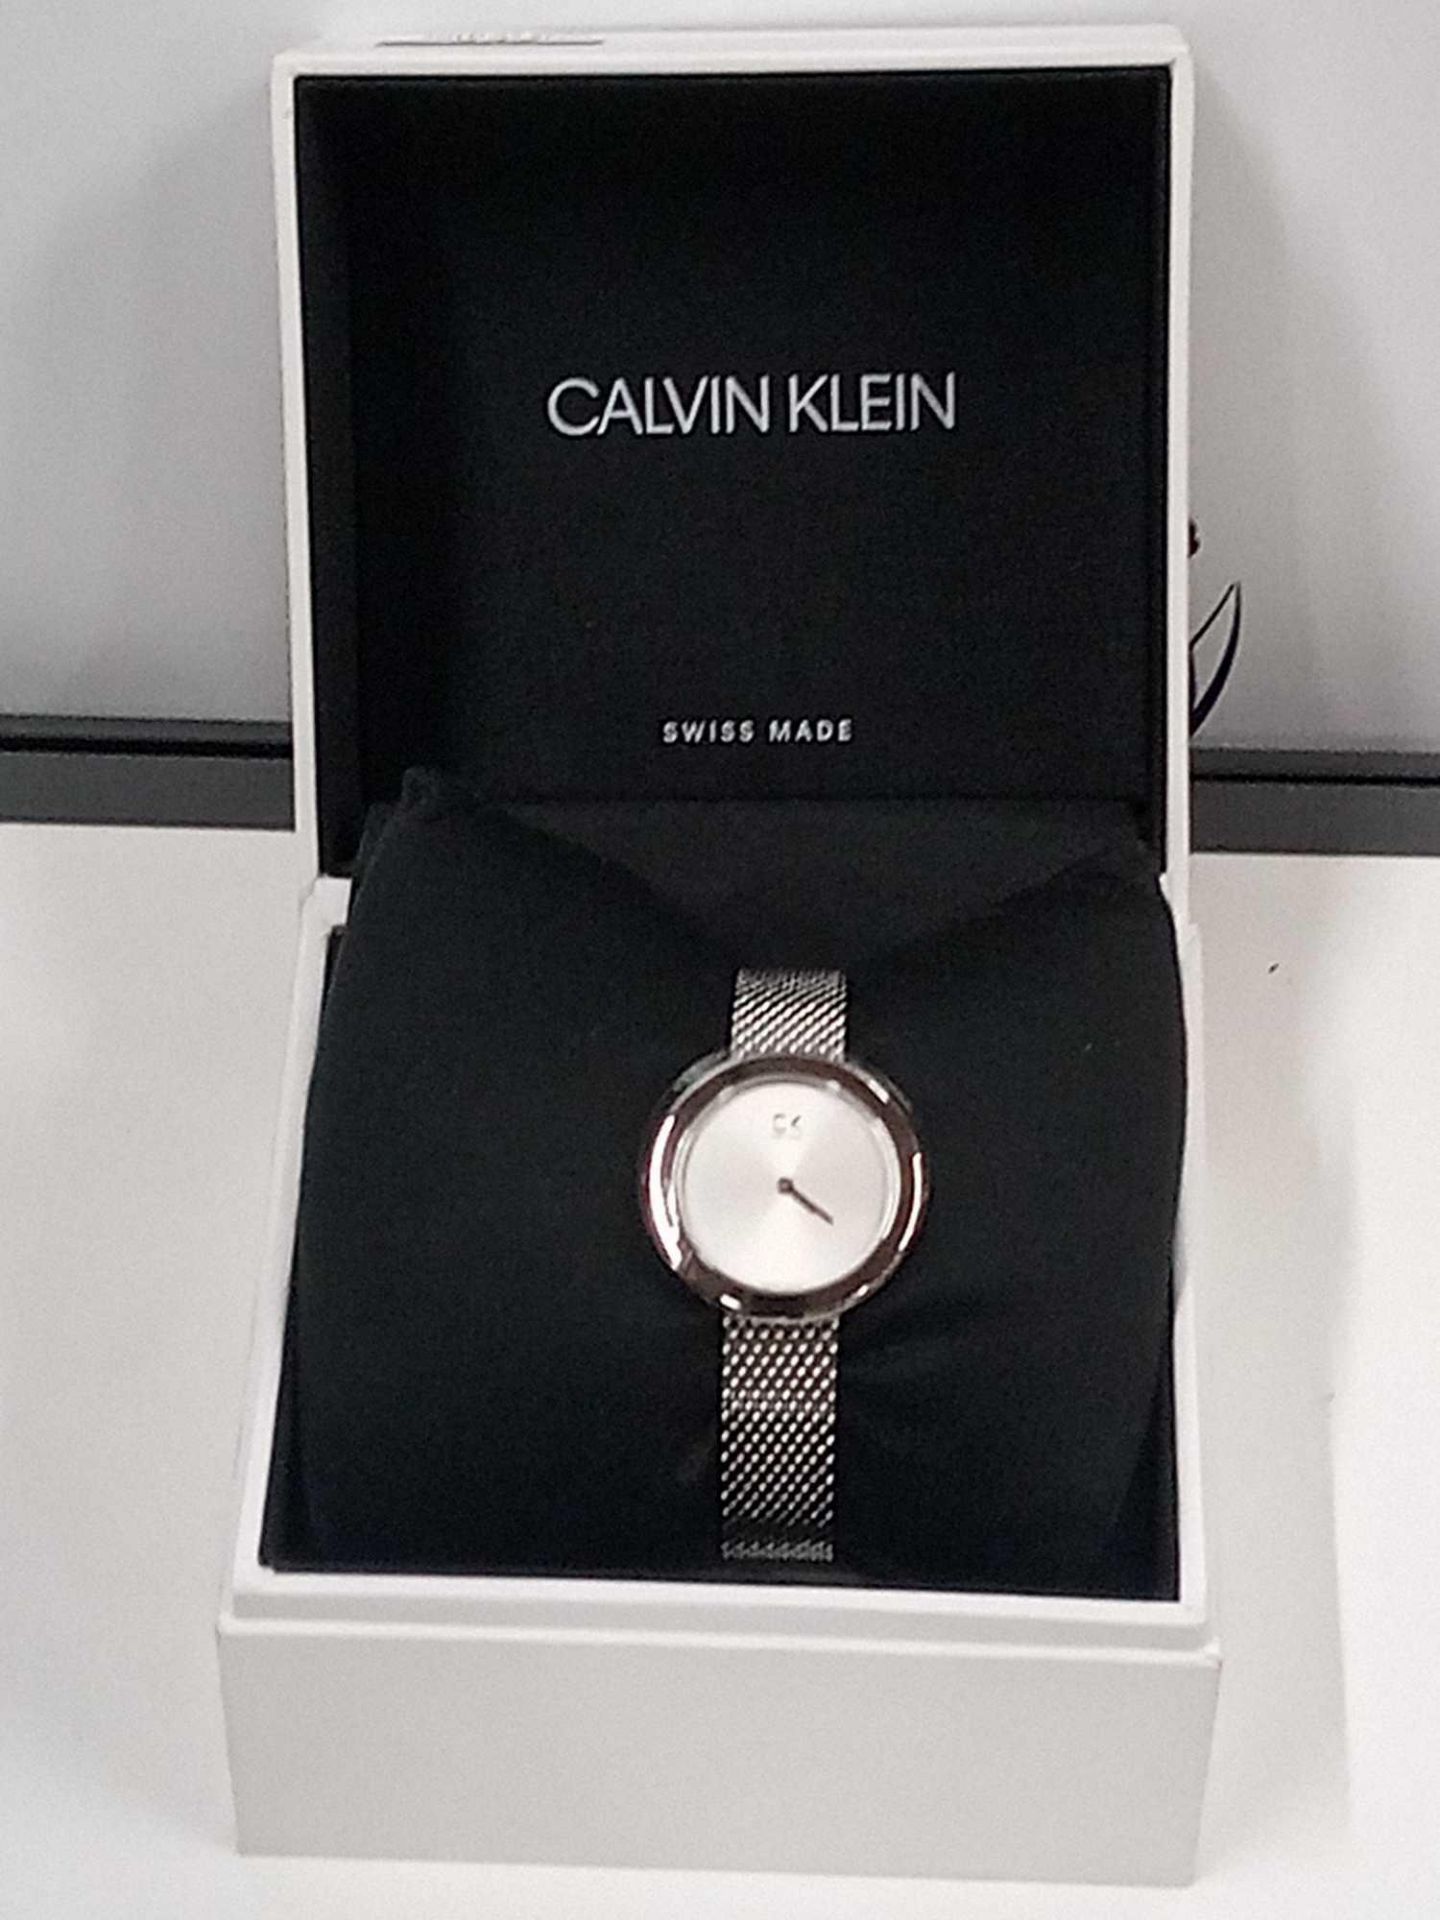 RRP £110 Boxed Calvin Klein Swiss Made Small Face Silver Mesh Watch - Image 4 of 4